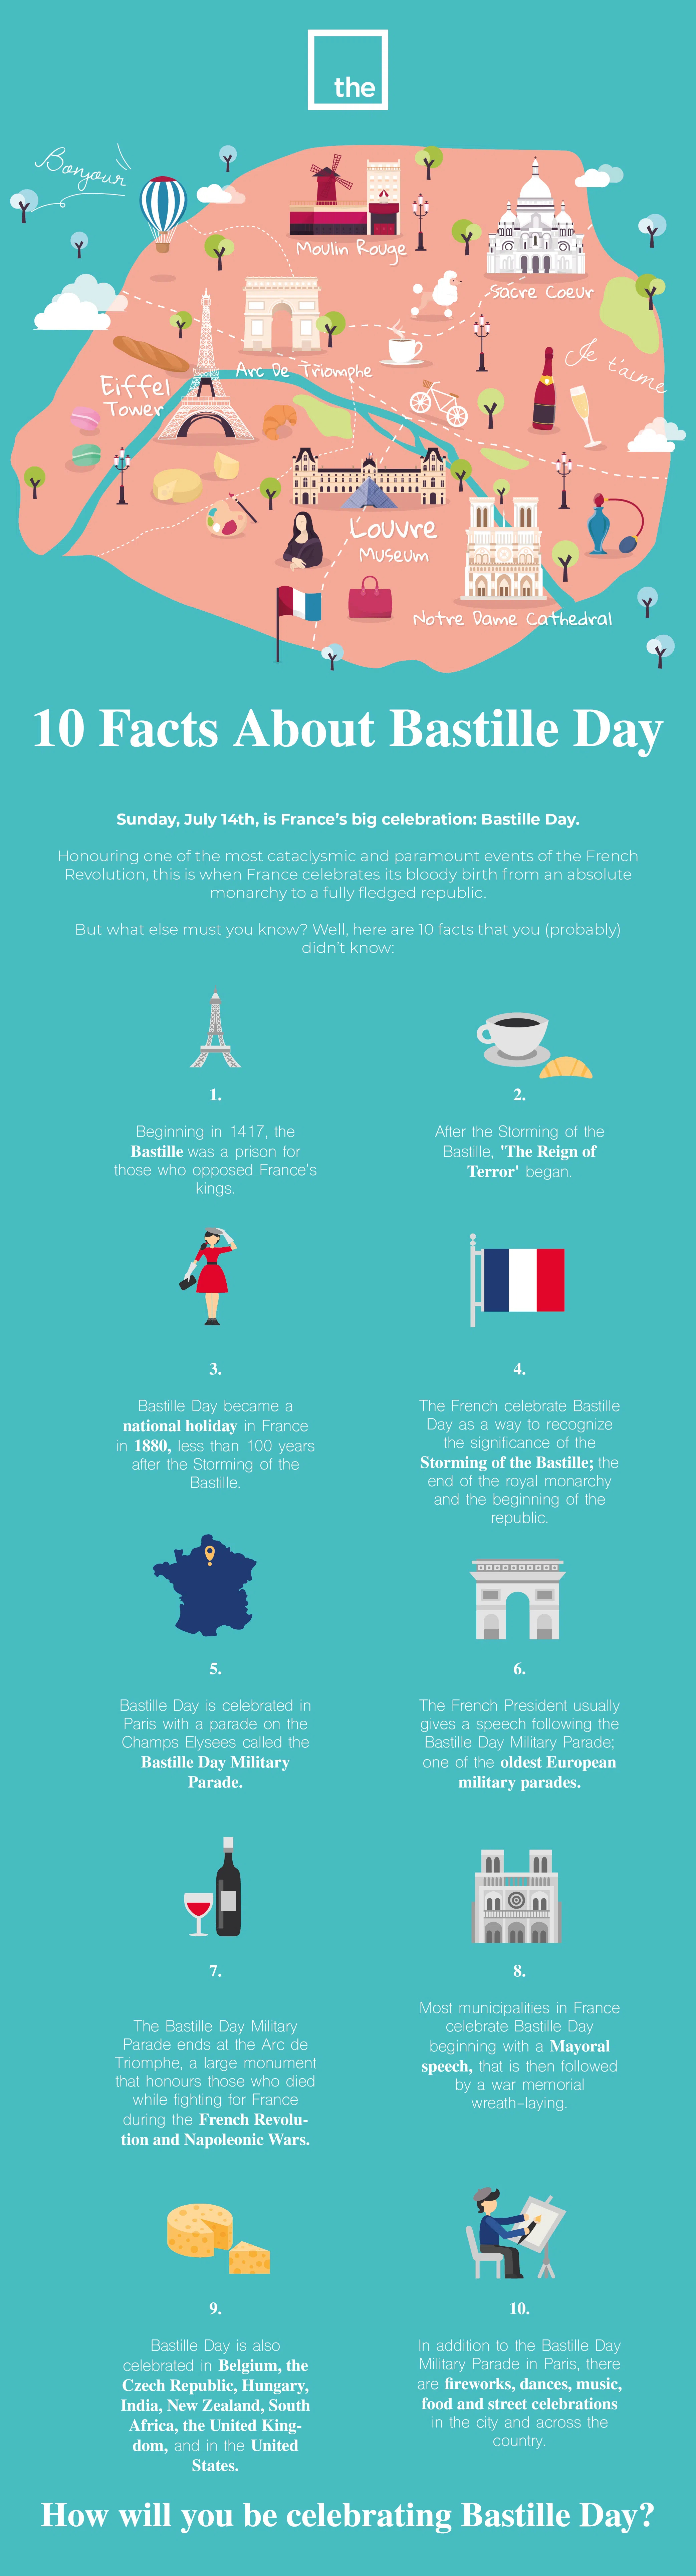 10 Facts About Bastille Day - Infographic